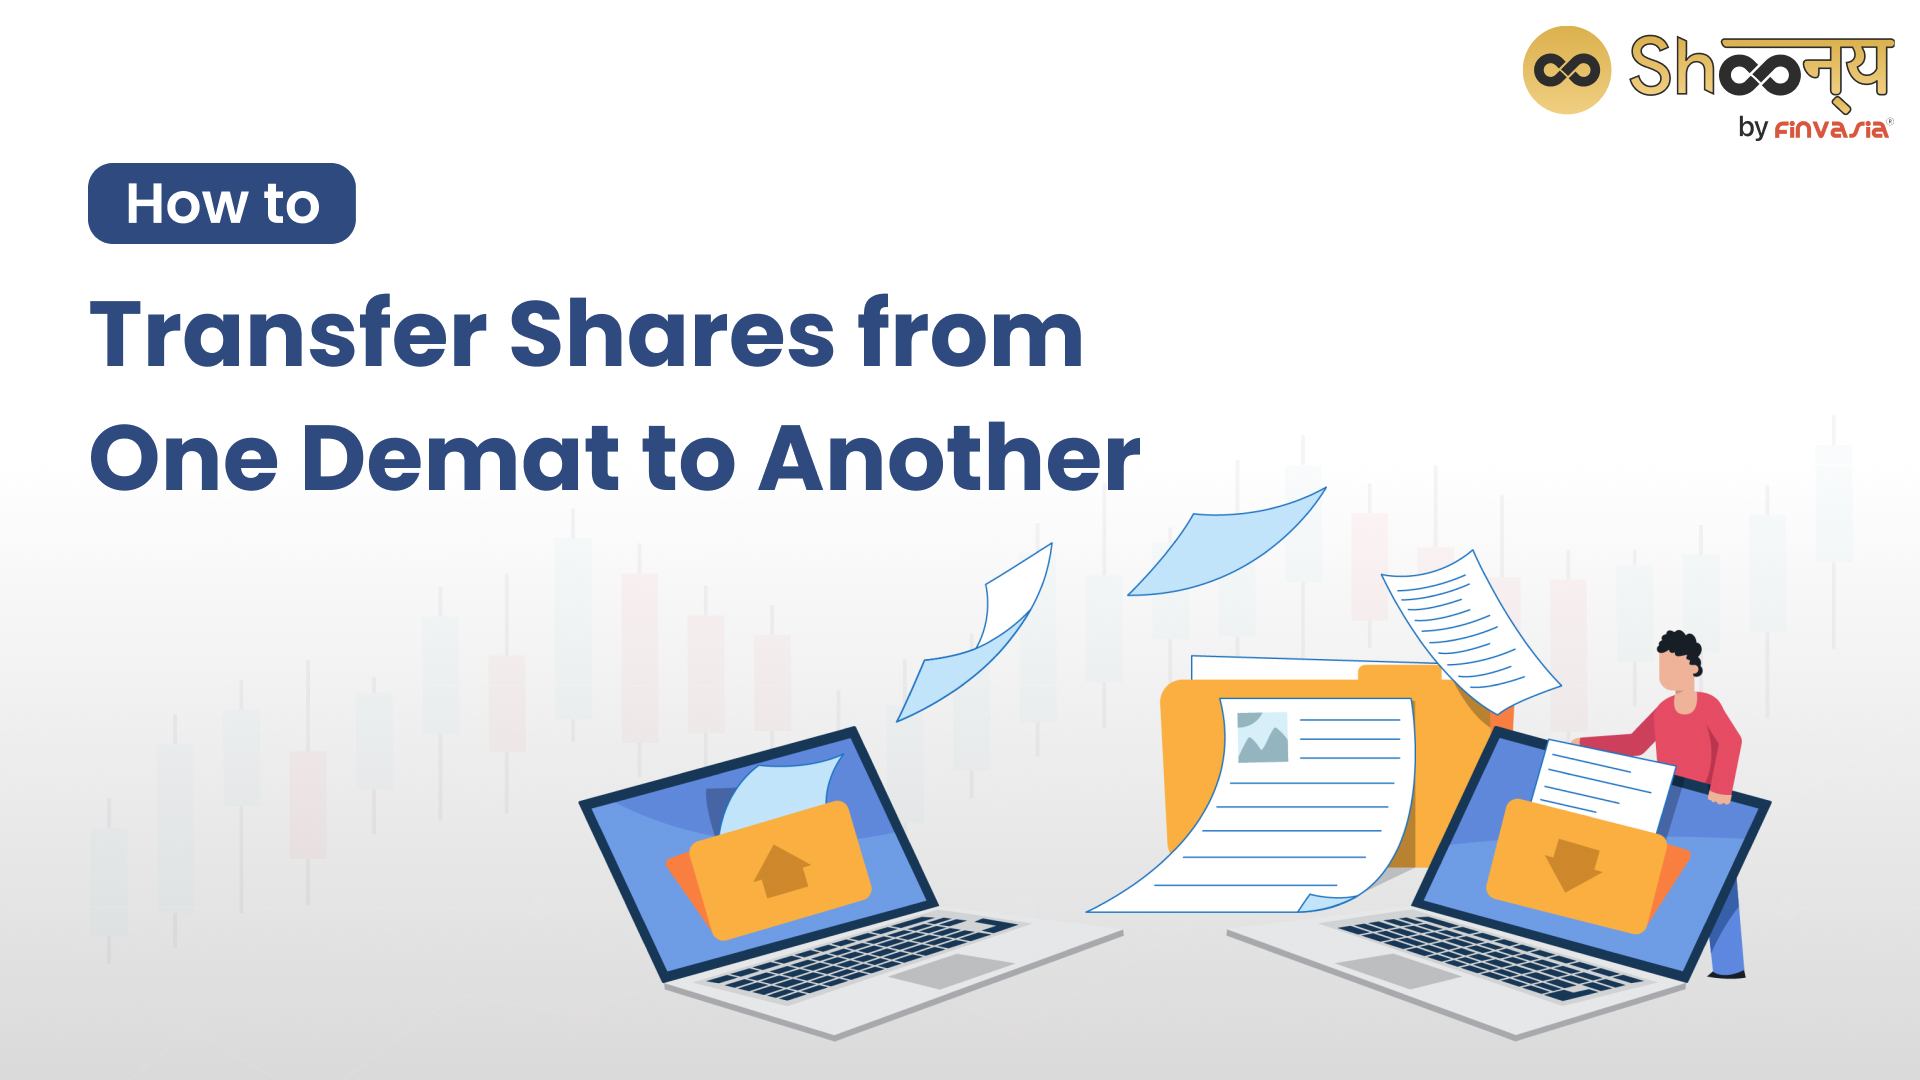 How Can You Transfer Shares from One Demat to Another?